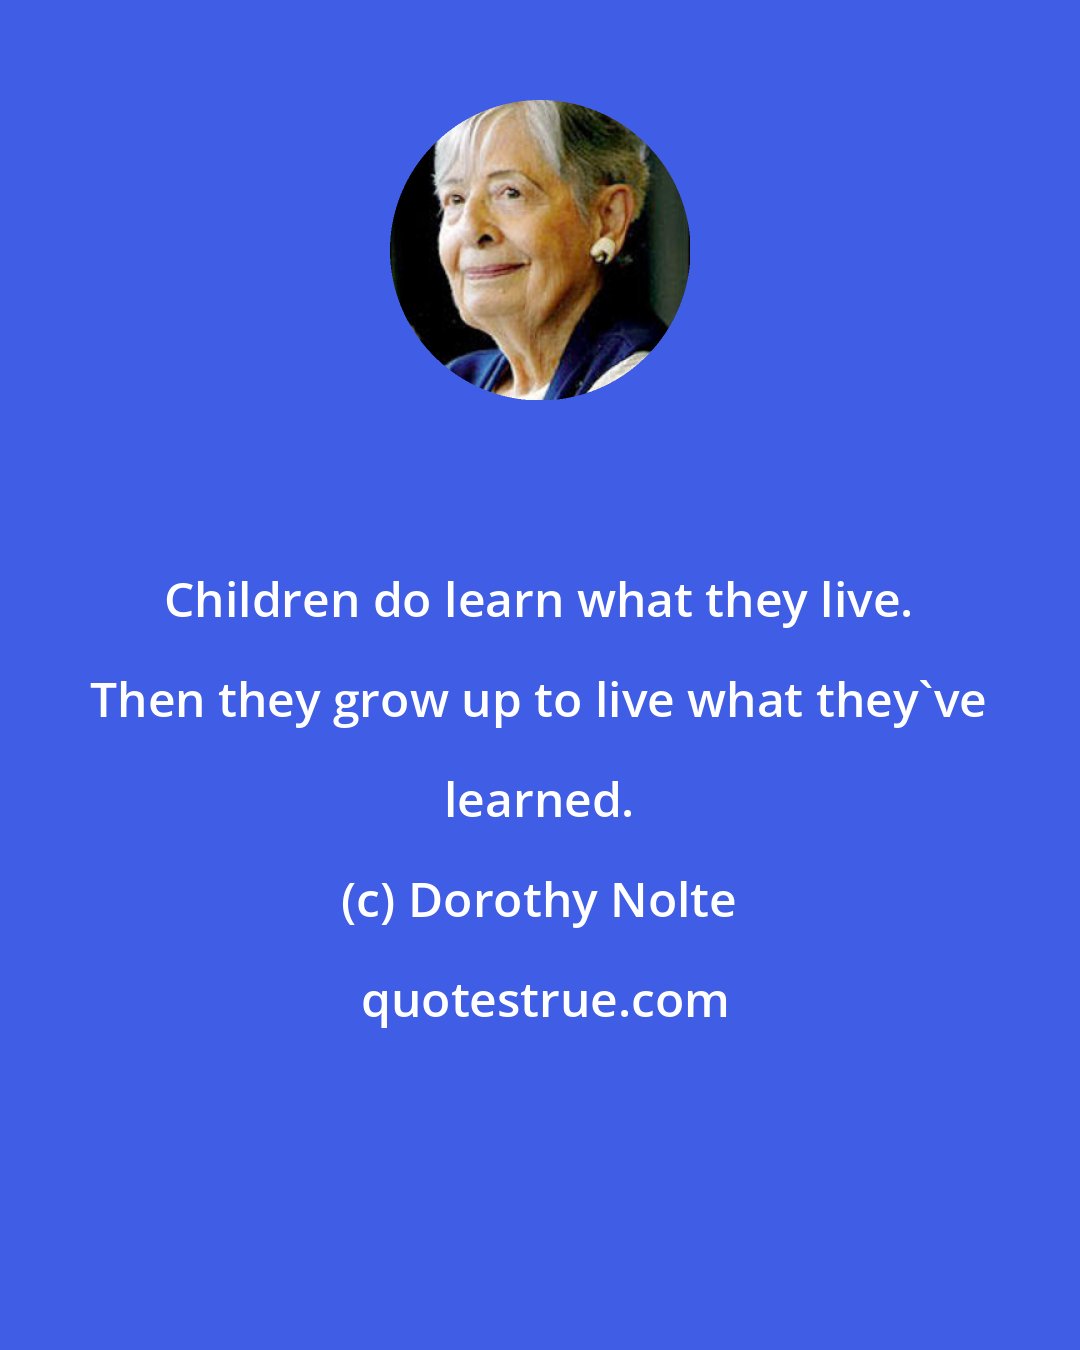 Dorothy Nolte: Children do learn what they live. Then they grow up to live what they've learned.